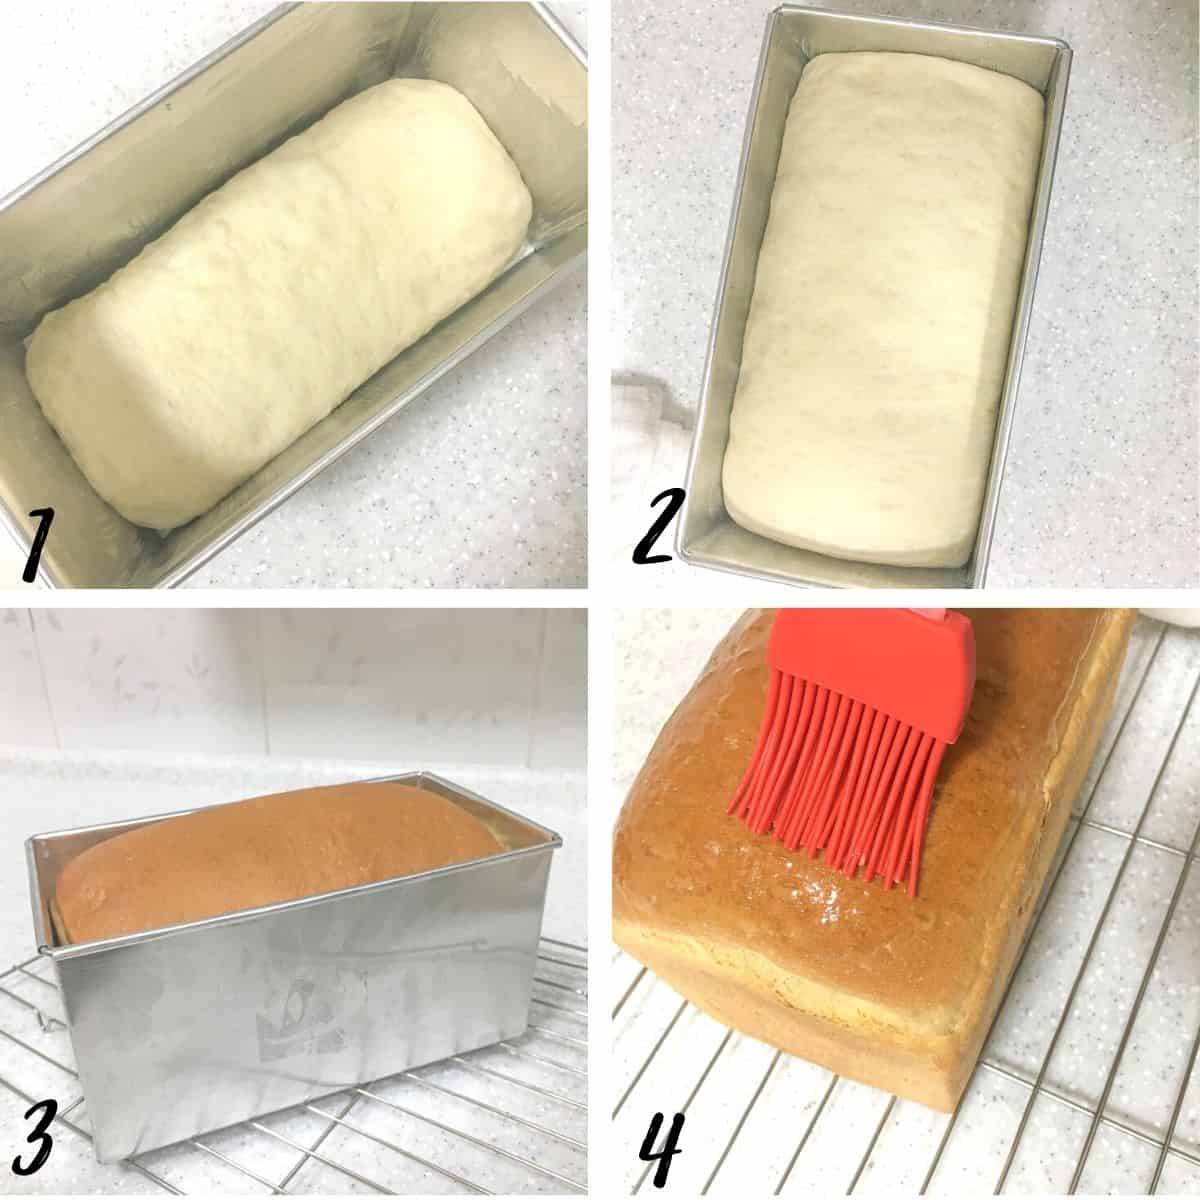 A poster of 4 images showing how to proof and bake a loaf bread, and how to apply butter after baking